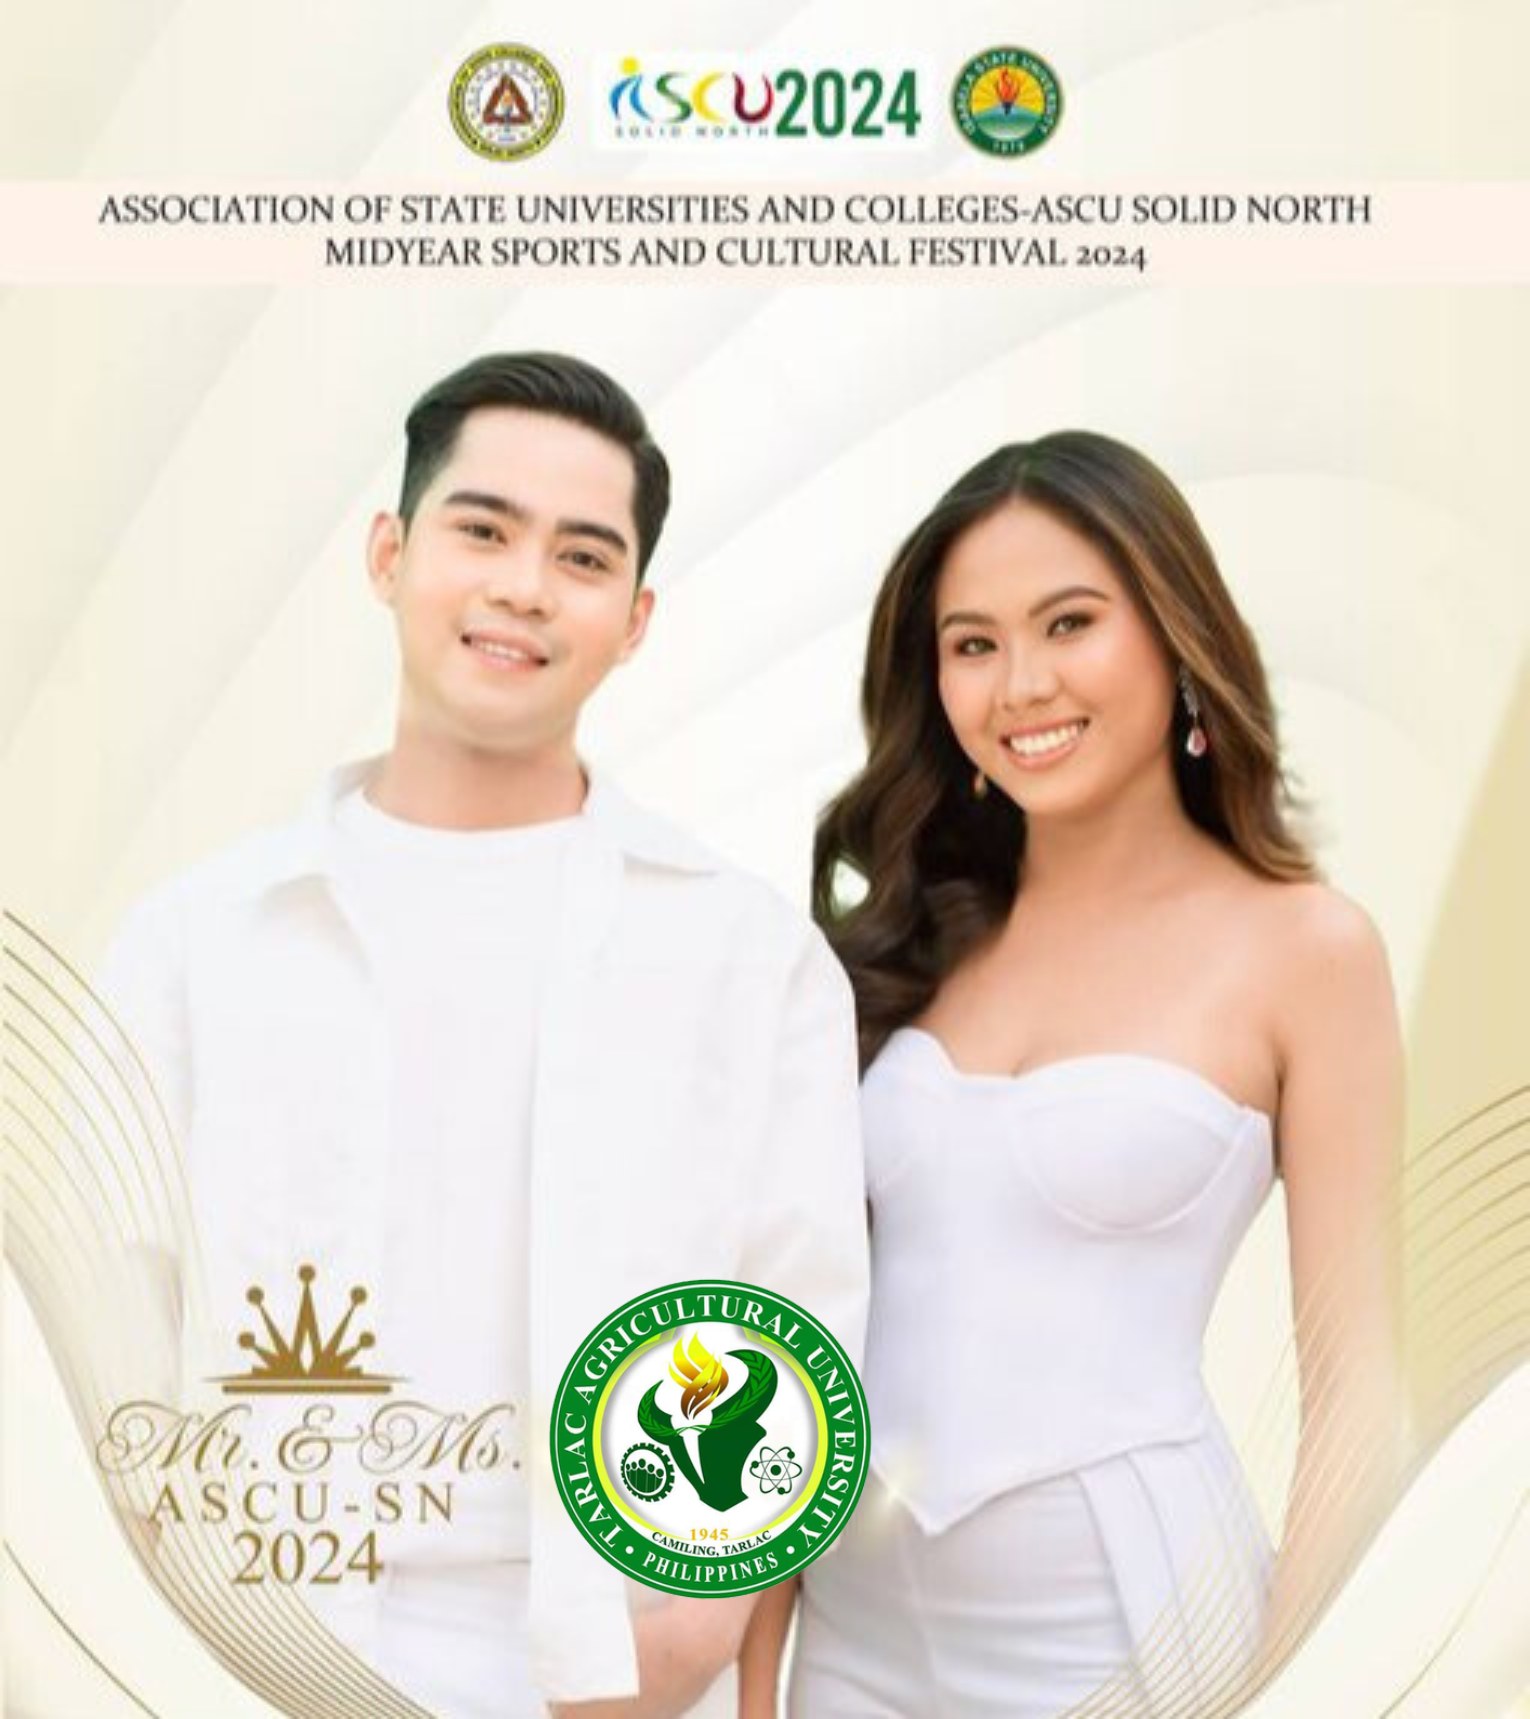 𝐔𝐍𝐈𝐕𝐄𝐑𝐒𝐈𝐓𝐘 𝐁𝐔𝐋𝐋𝐄𝐓𝐈𝐍 | TAU Sociocultural Development Office Let’s help Tarlac Agricultural University’s (TAU) candidates ace the Mr. and Ms. ASCU-SN’s People’s Choice Award